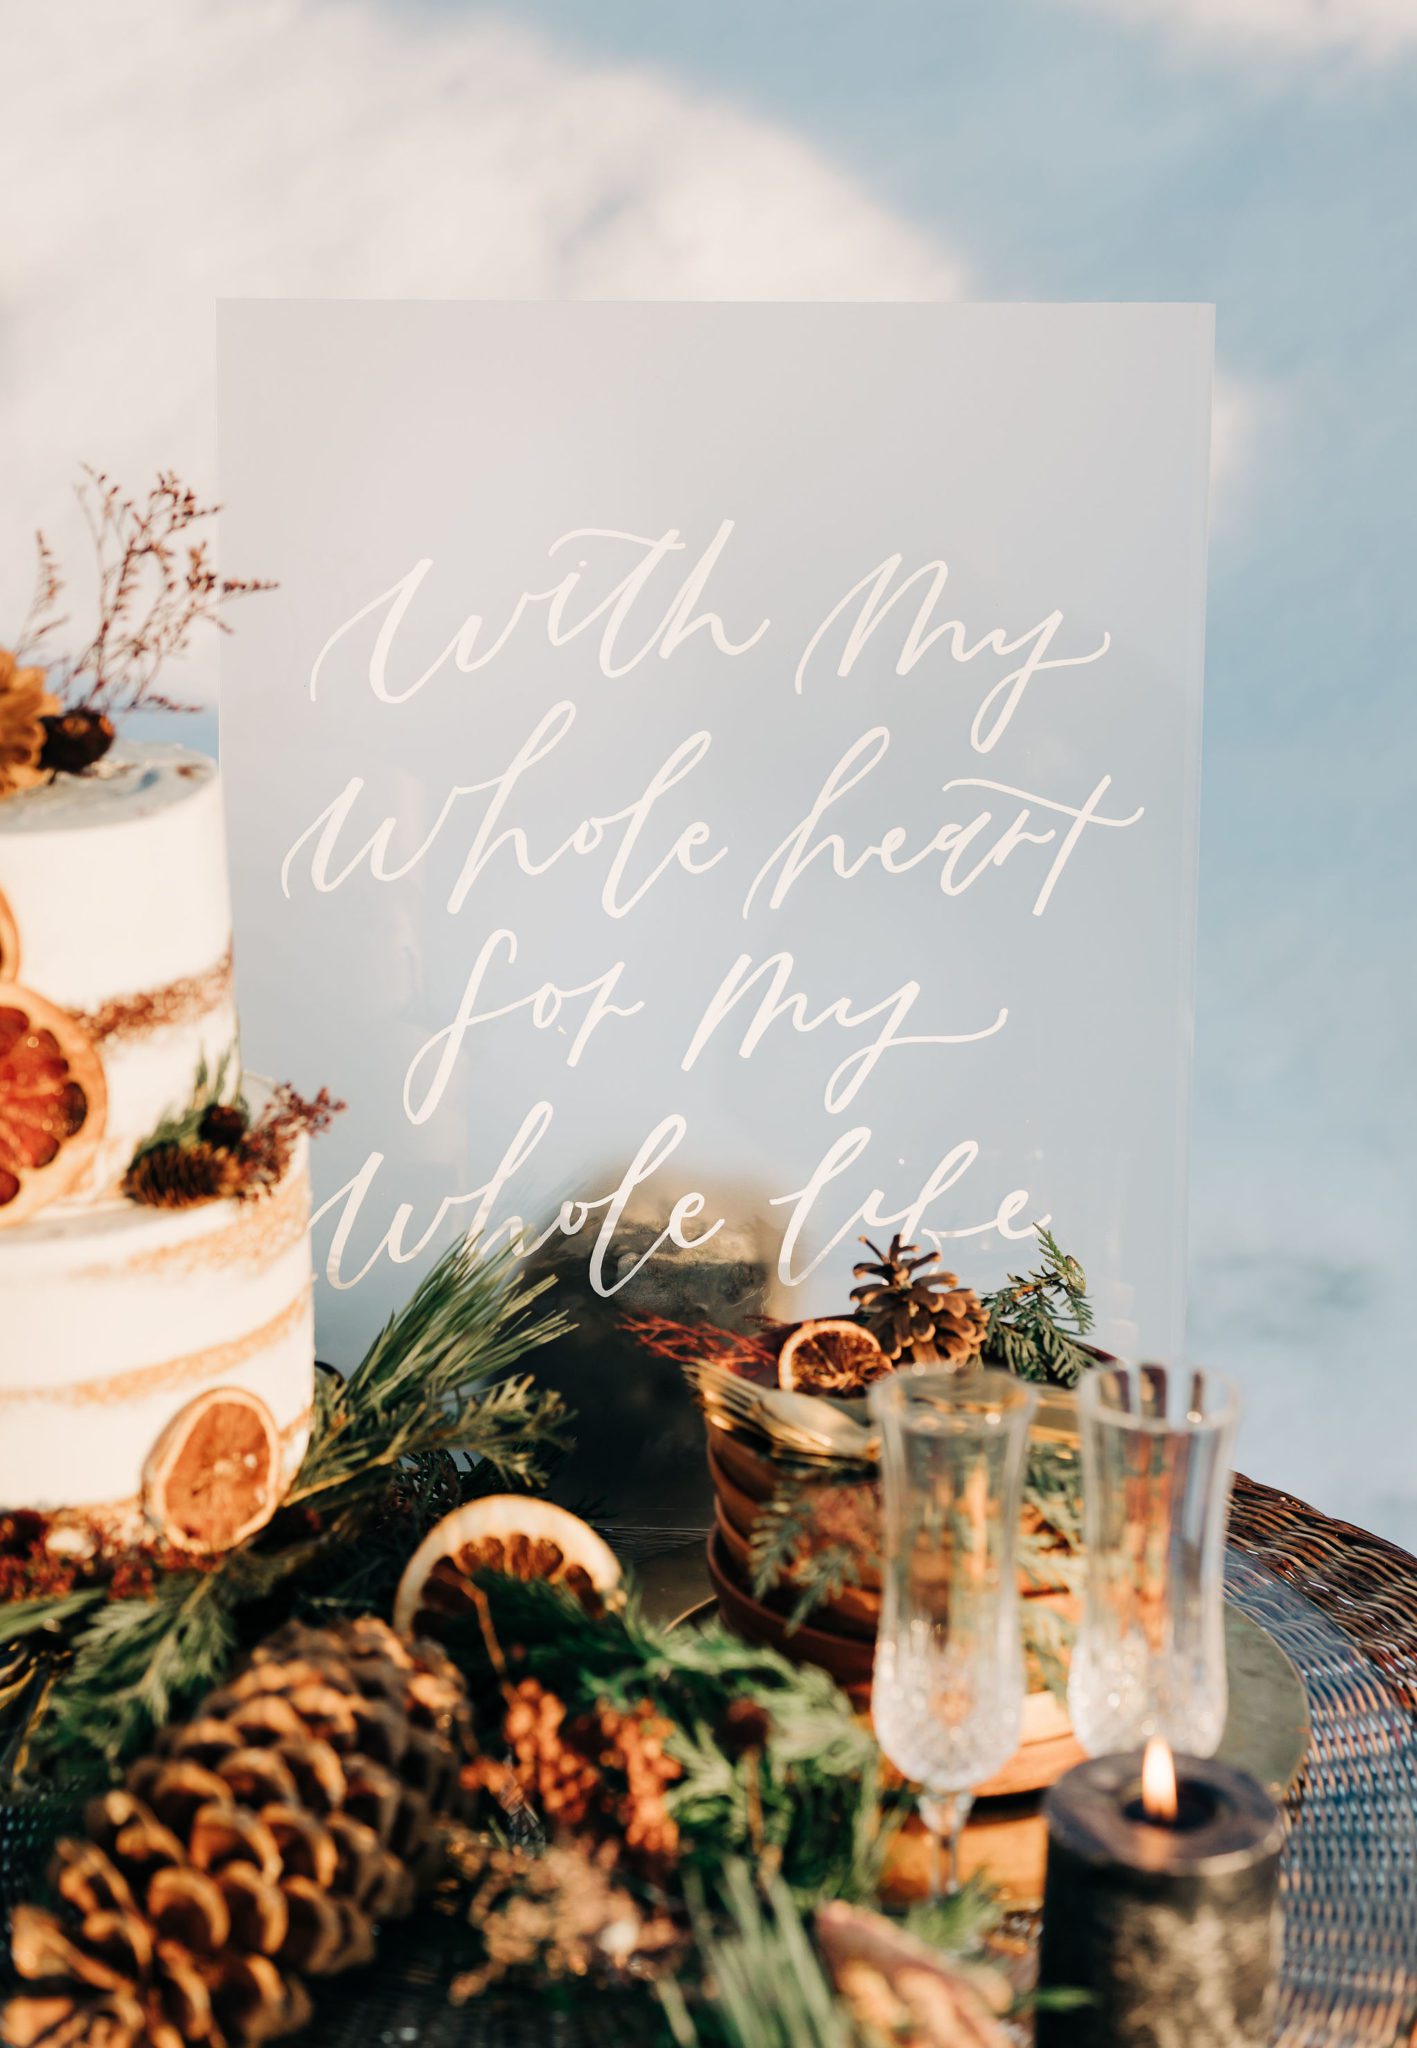 Acrylic calligraphy menu for rustic winter table scape